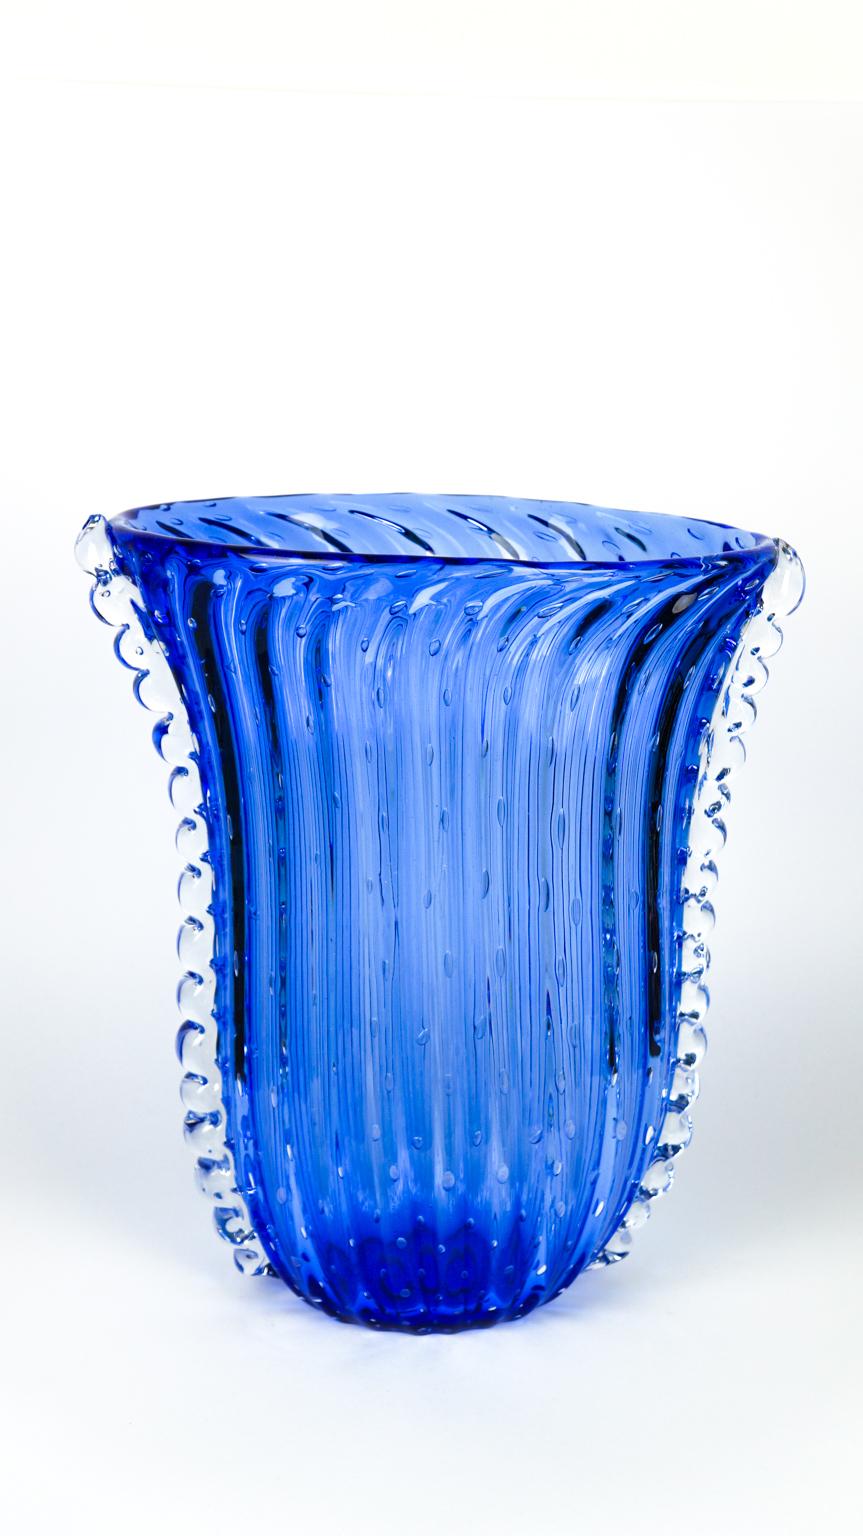 Handmade blue Murano glass vase with internal bubble decorations and lateral crystal.
This fantastic Art Deco style artwork will add an extra touch of class to your environment.
Vase signed with engraving: Made Murano Glass

 Murano glass vase